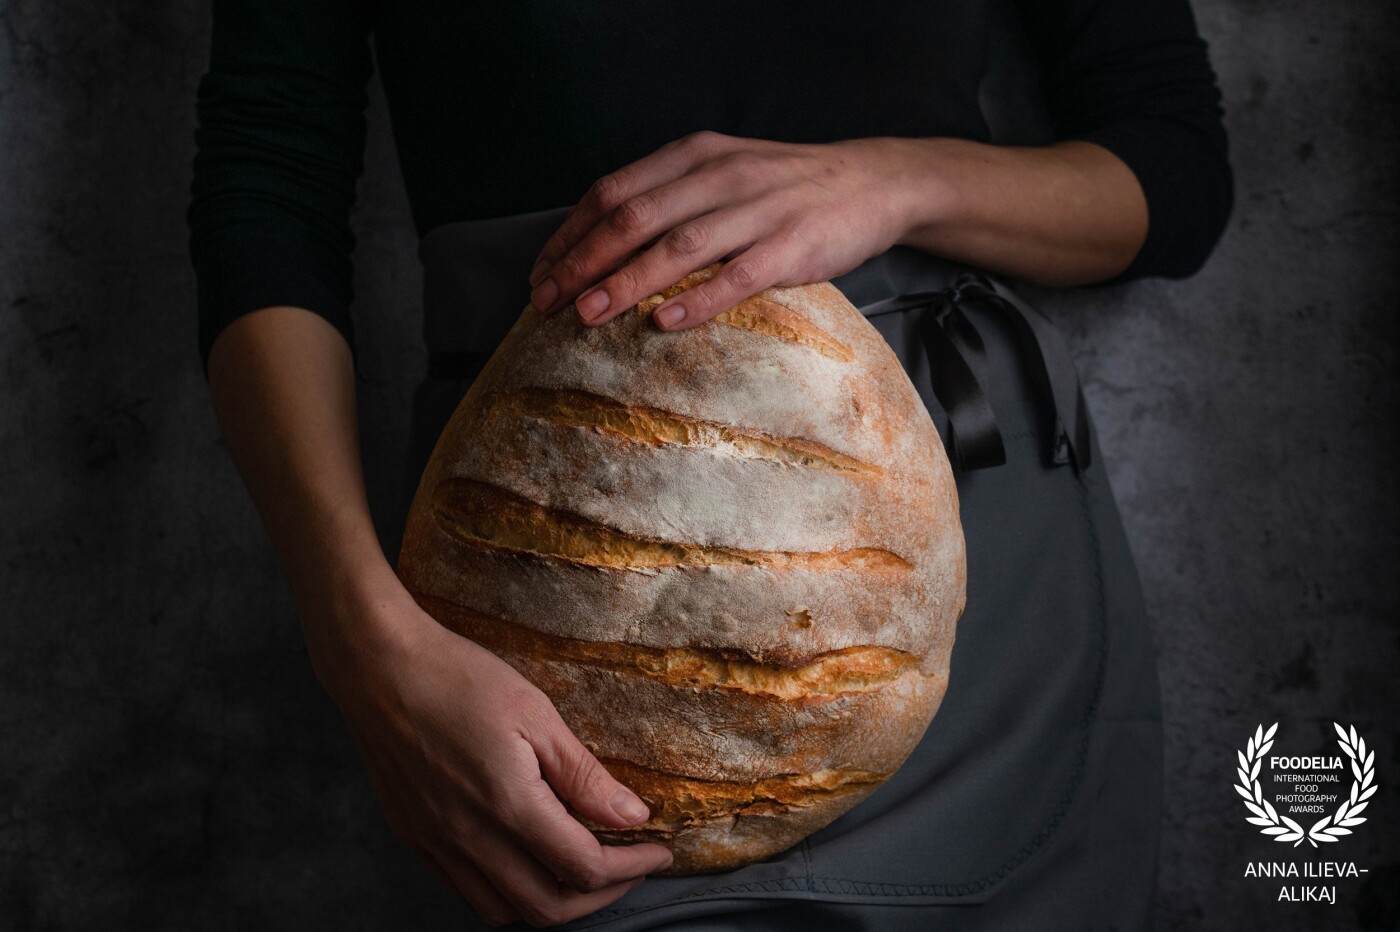 The protagonist of each table - The Bread - held by the strong and loving hands of a woman. I used diffused natural light and moody, dark background with the idea to rapresent the sacrifices of the bakers, who begin their work in the dark to give us our daily bread.